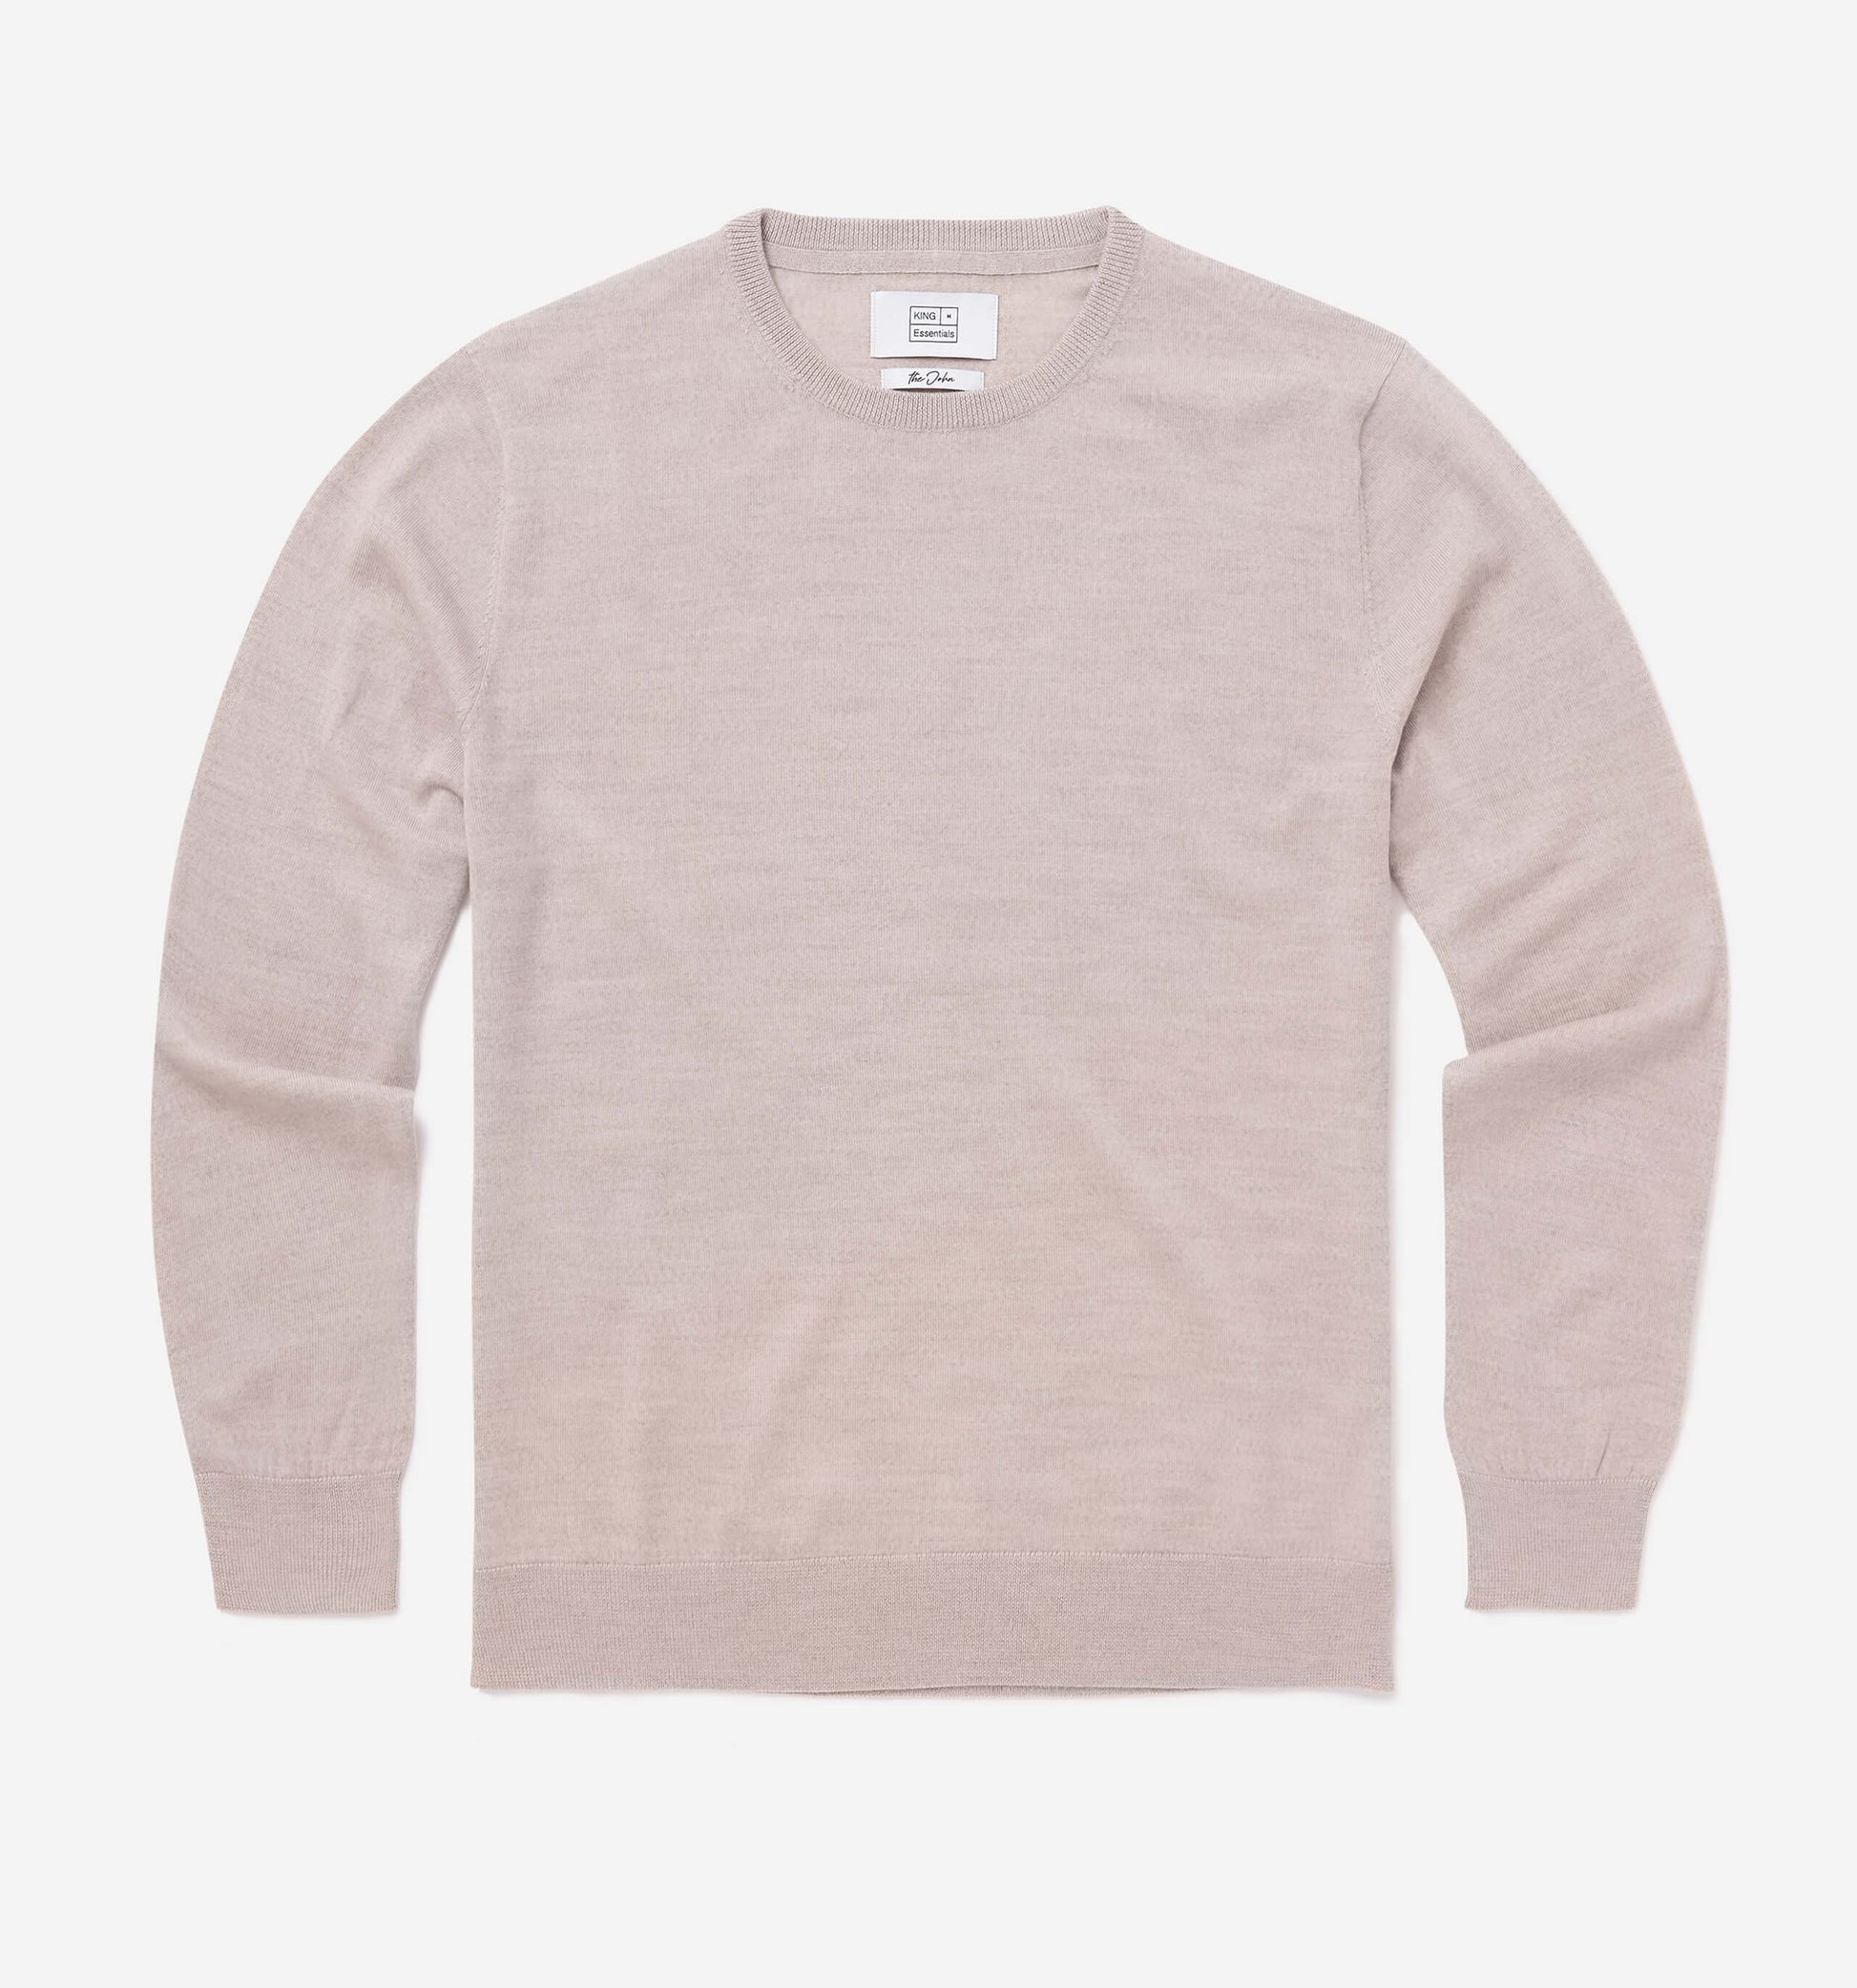 The John - Merino Wool Crewneck In Light Brown From King Essentials